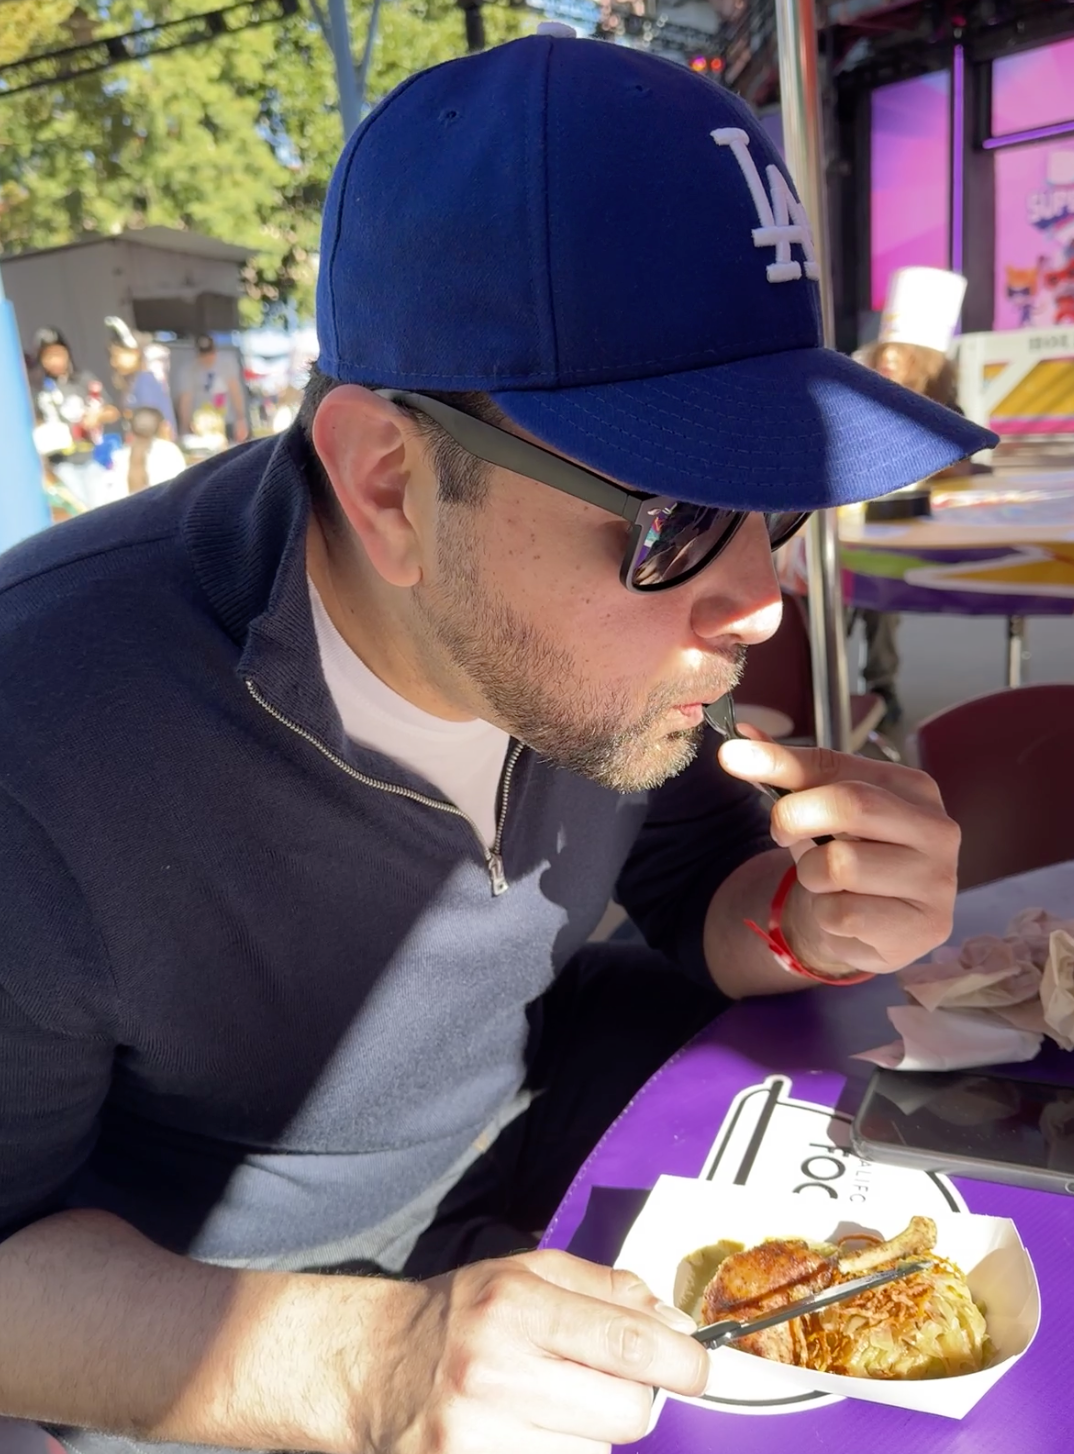 Man tasting food at an outdoor market, capturing a travel dining experience